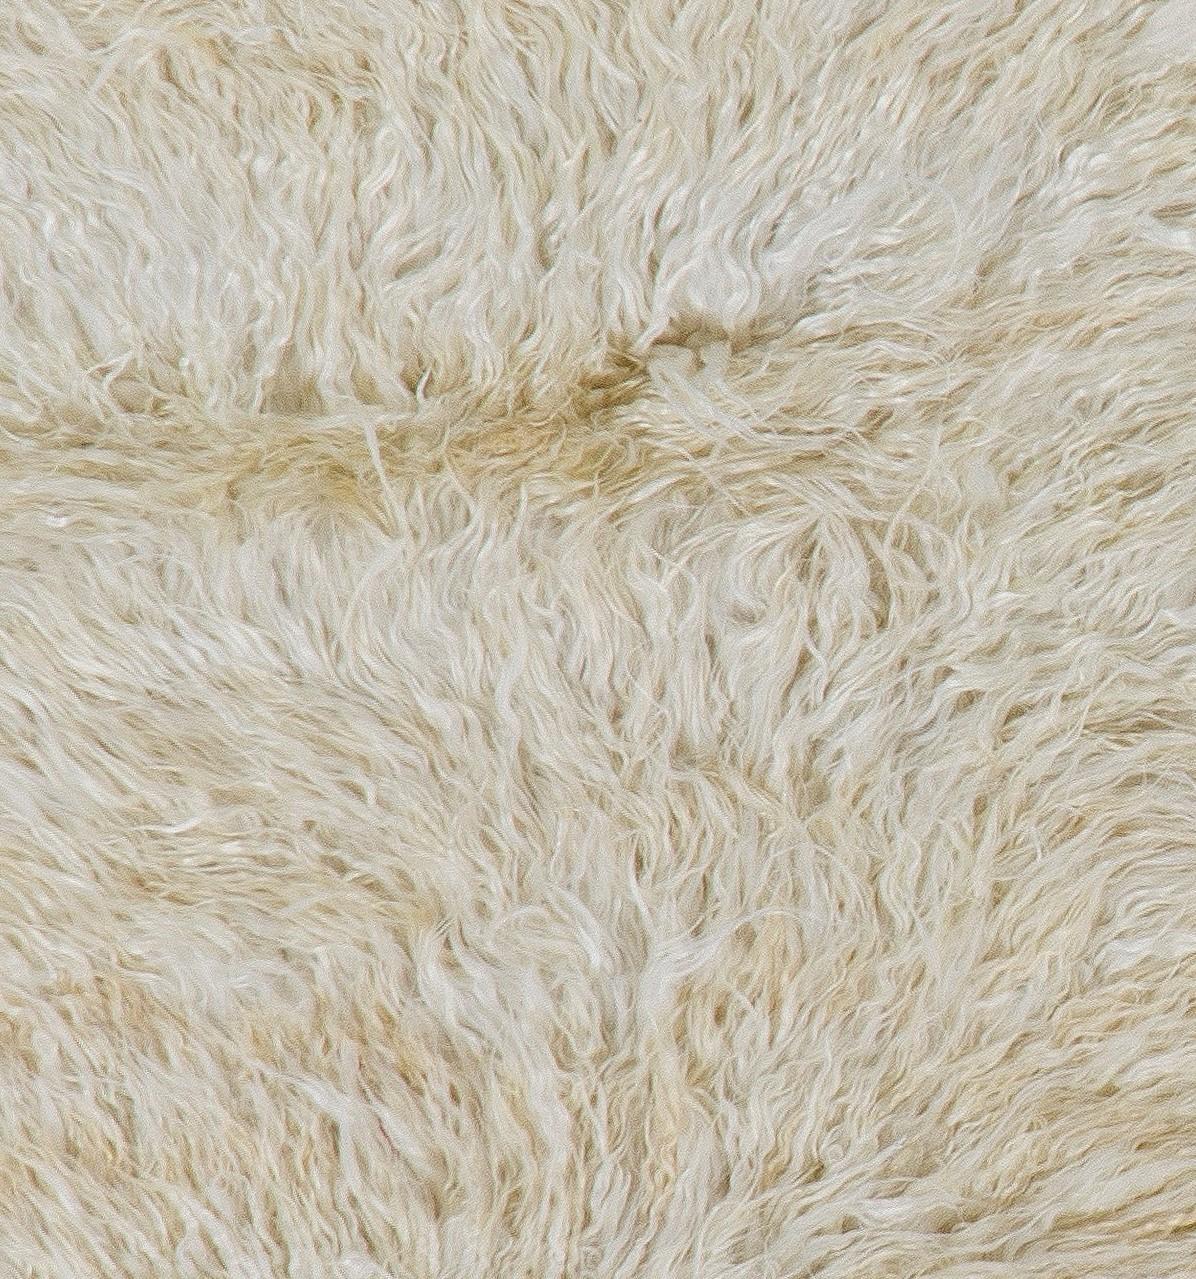 A Hand-knotted shag pile rug made of natural undyed mohair derived from local “Angora Goats” that are famous for their soft, lustrous long fleece. 

The rug is available as seen or if requested, it can be custom-produced in a different size, color